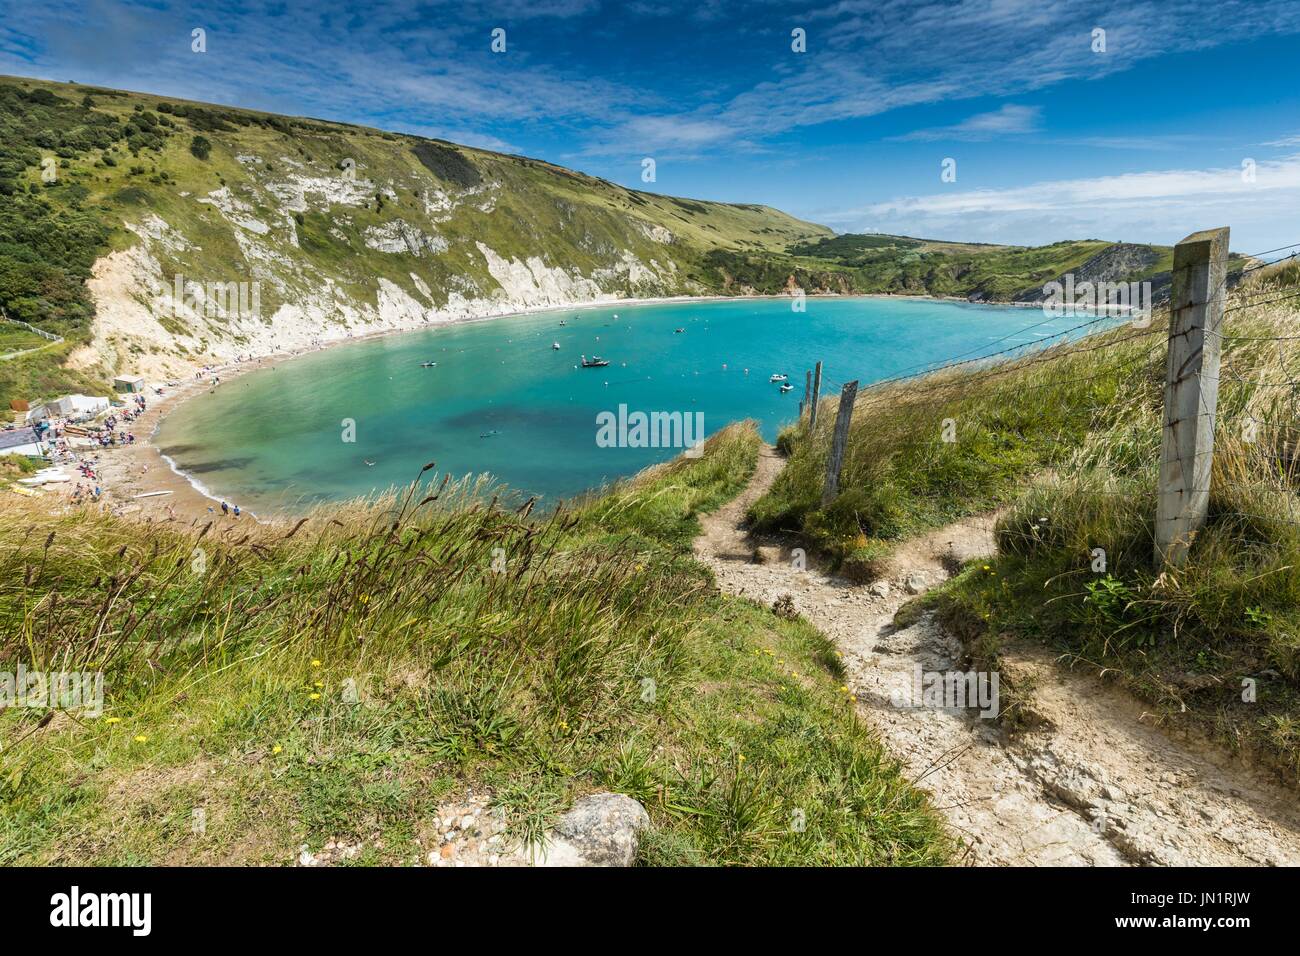 A view of Lulworth Cove on the Jurassic Coast, a UNESCO World Heritage Site in Dorset, UK Stock Photo